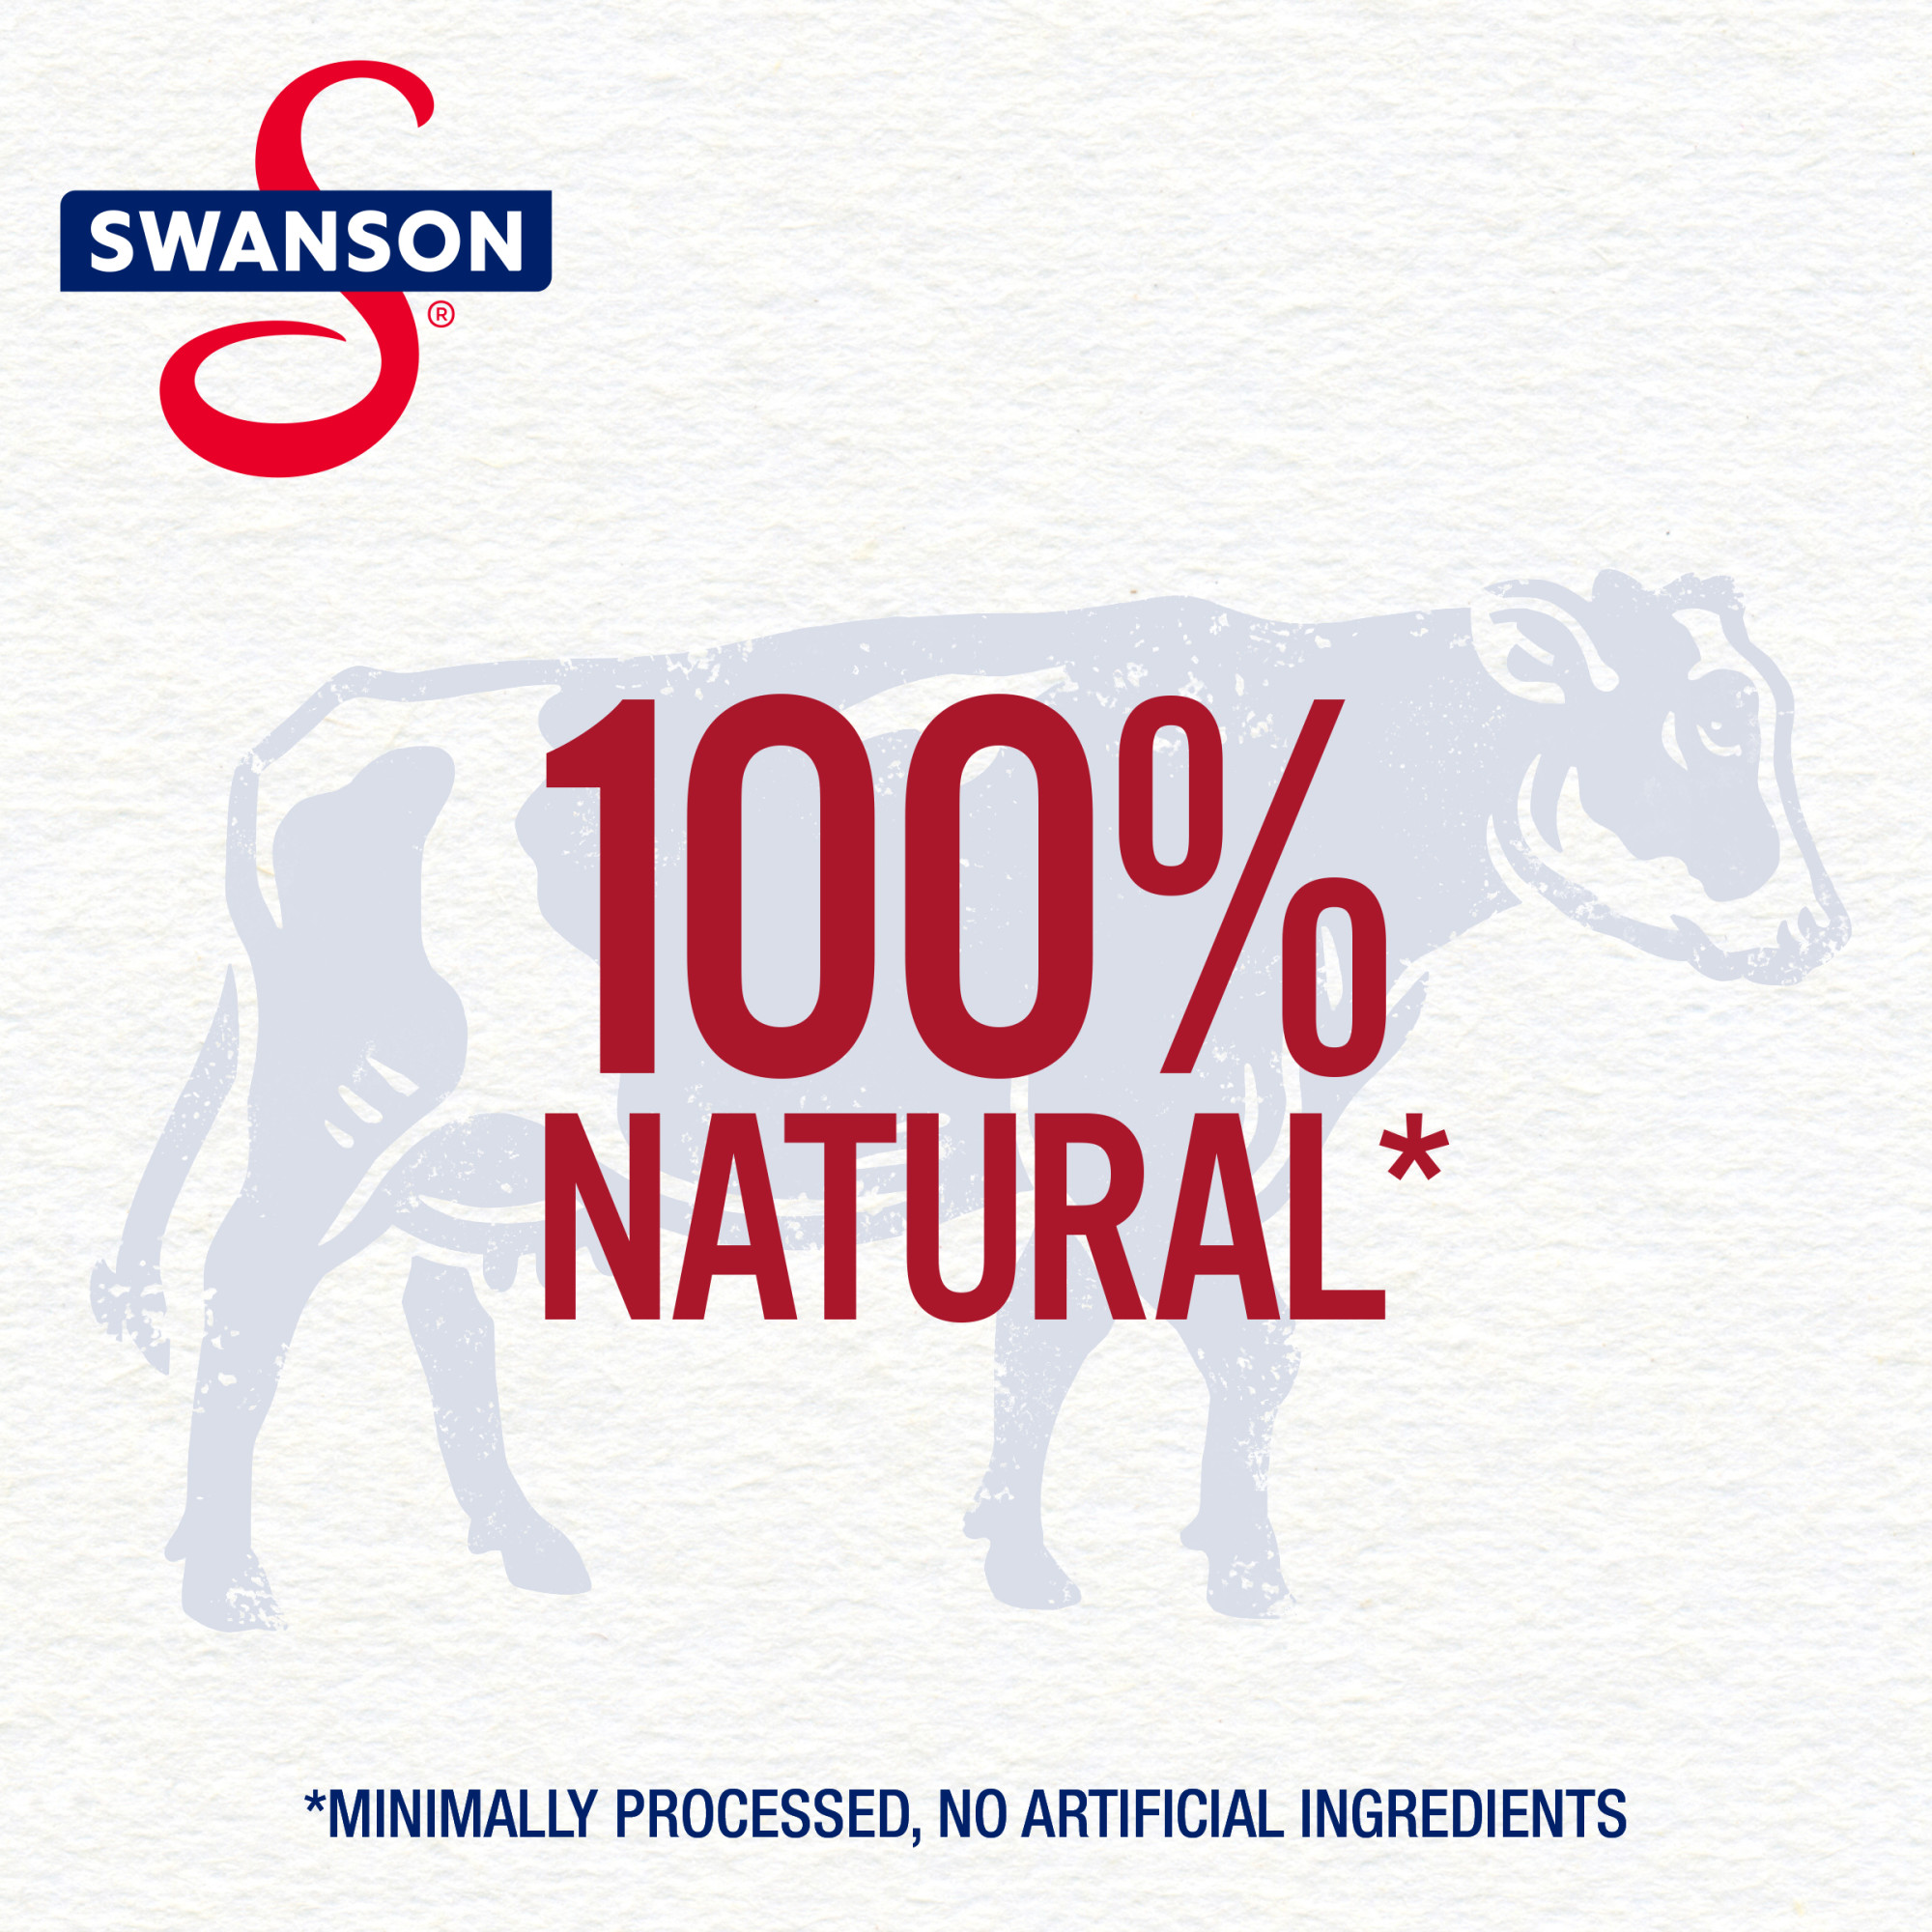 Swanson 100% Natural, Gluten-Free Unsalted Beef Broth, 32 oz Carton - image 4 of 15